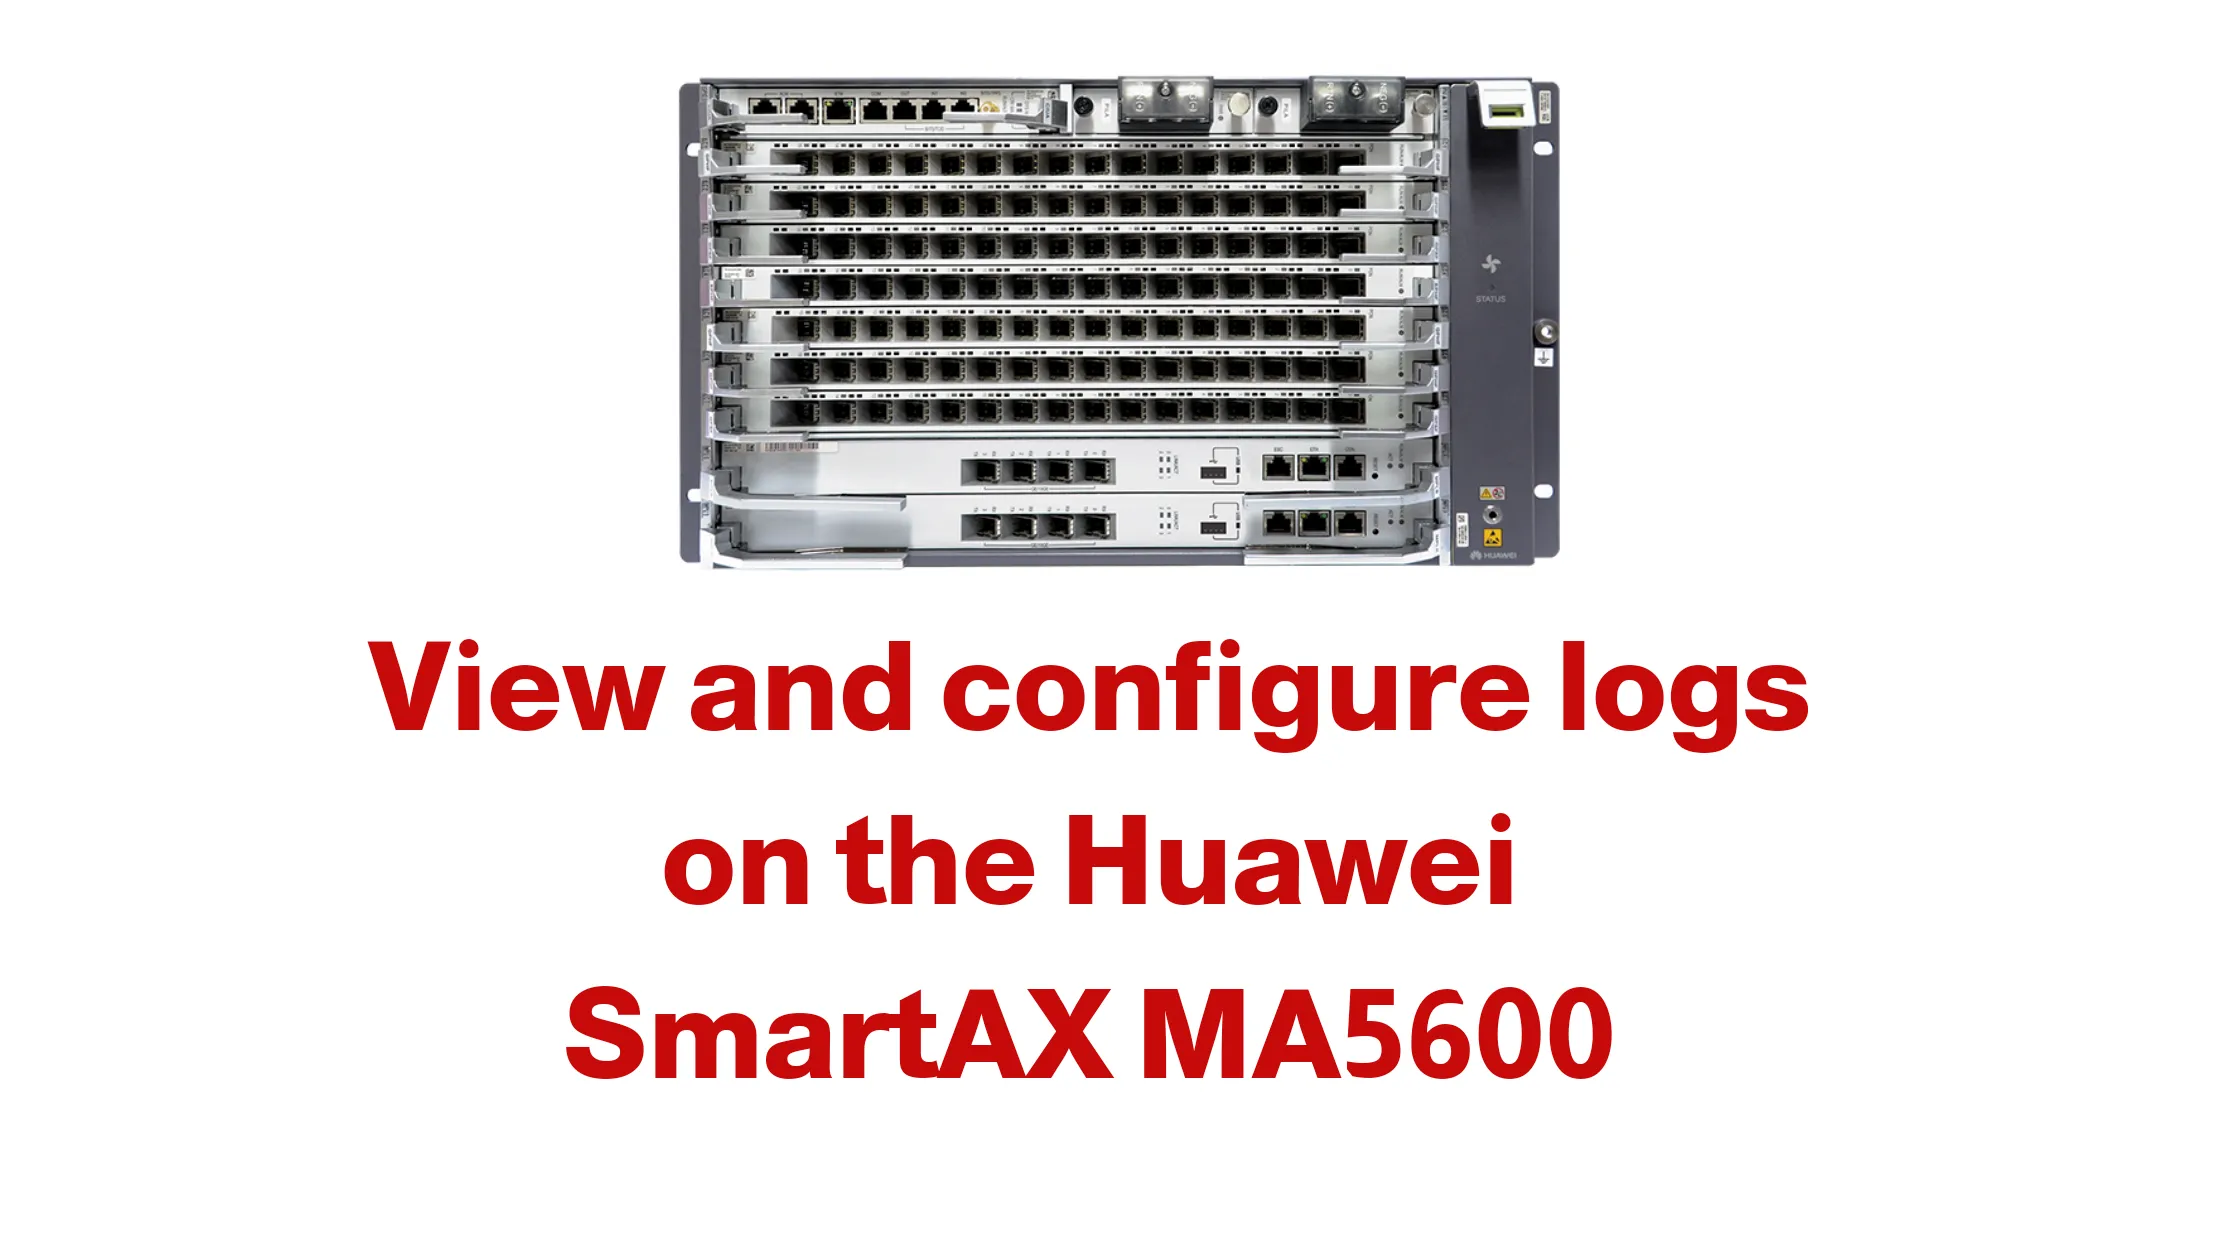 View and configure logs on the Huawei